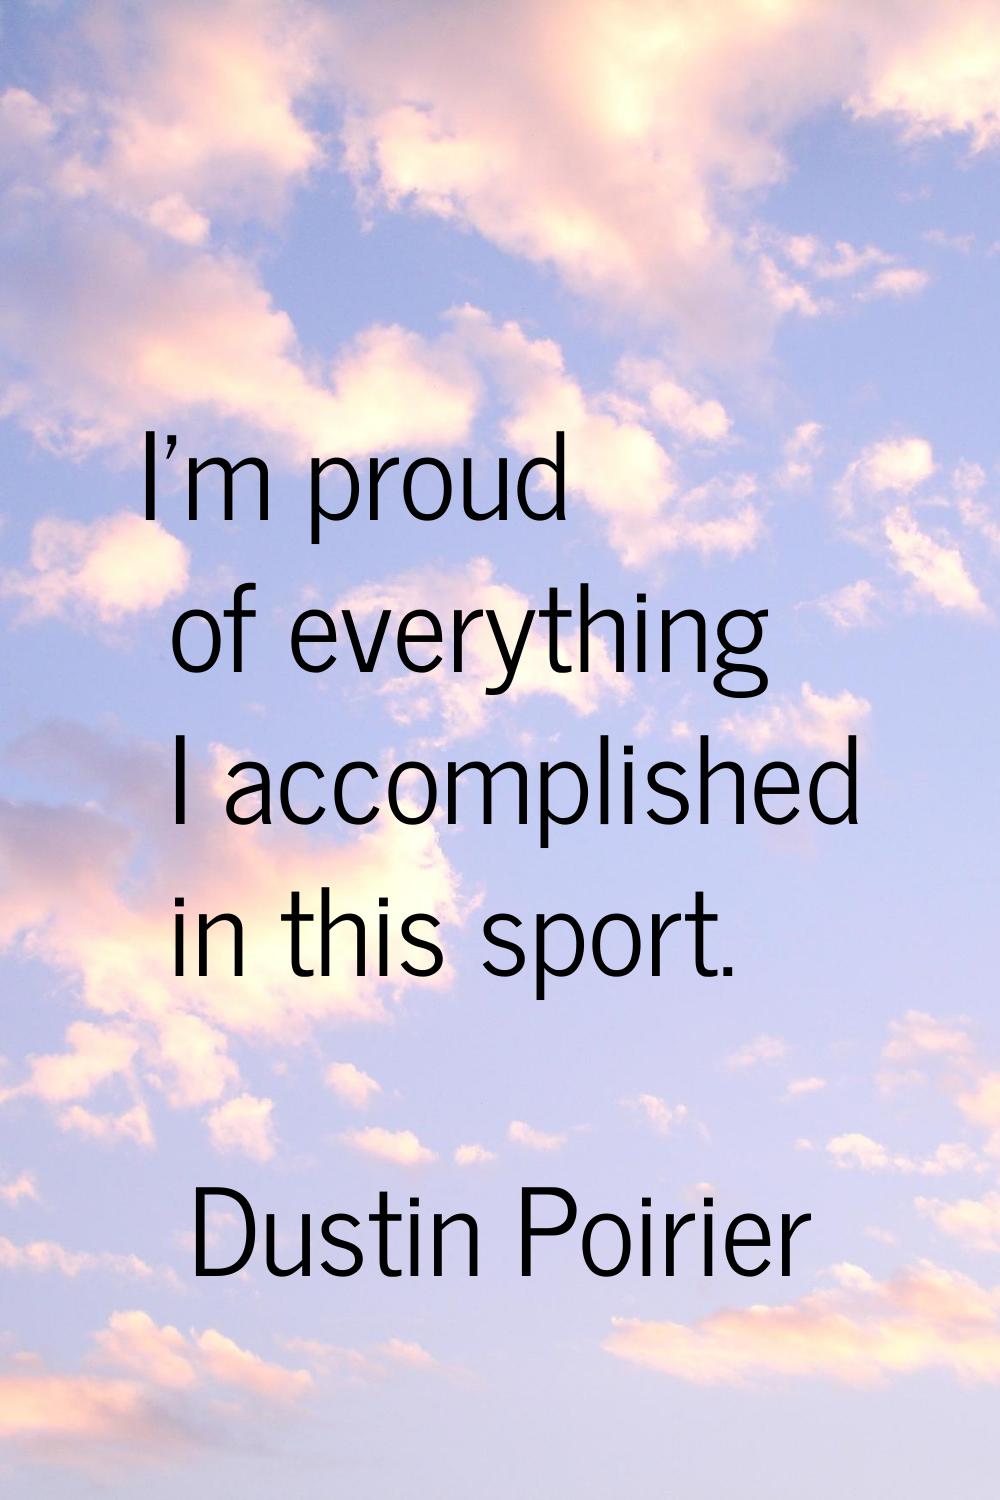 I'm proud of everything I accomplished in this sport.